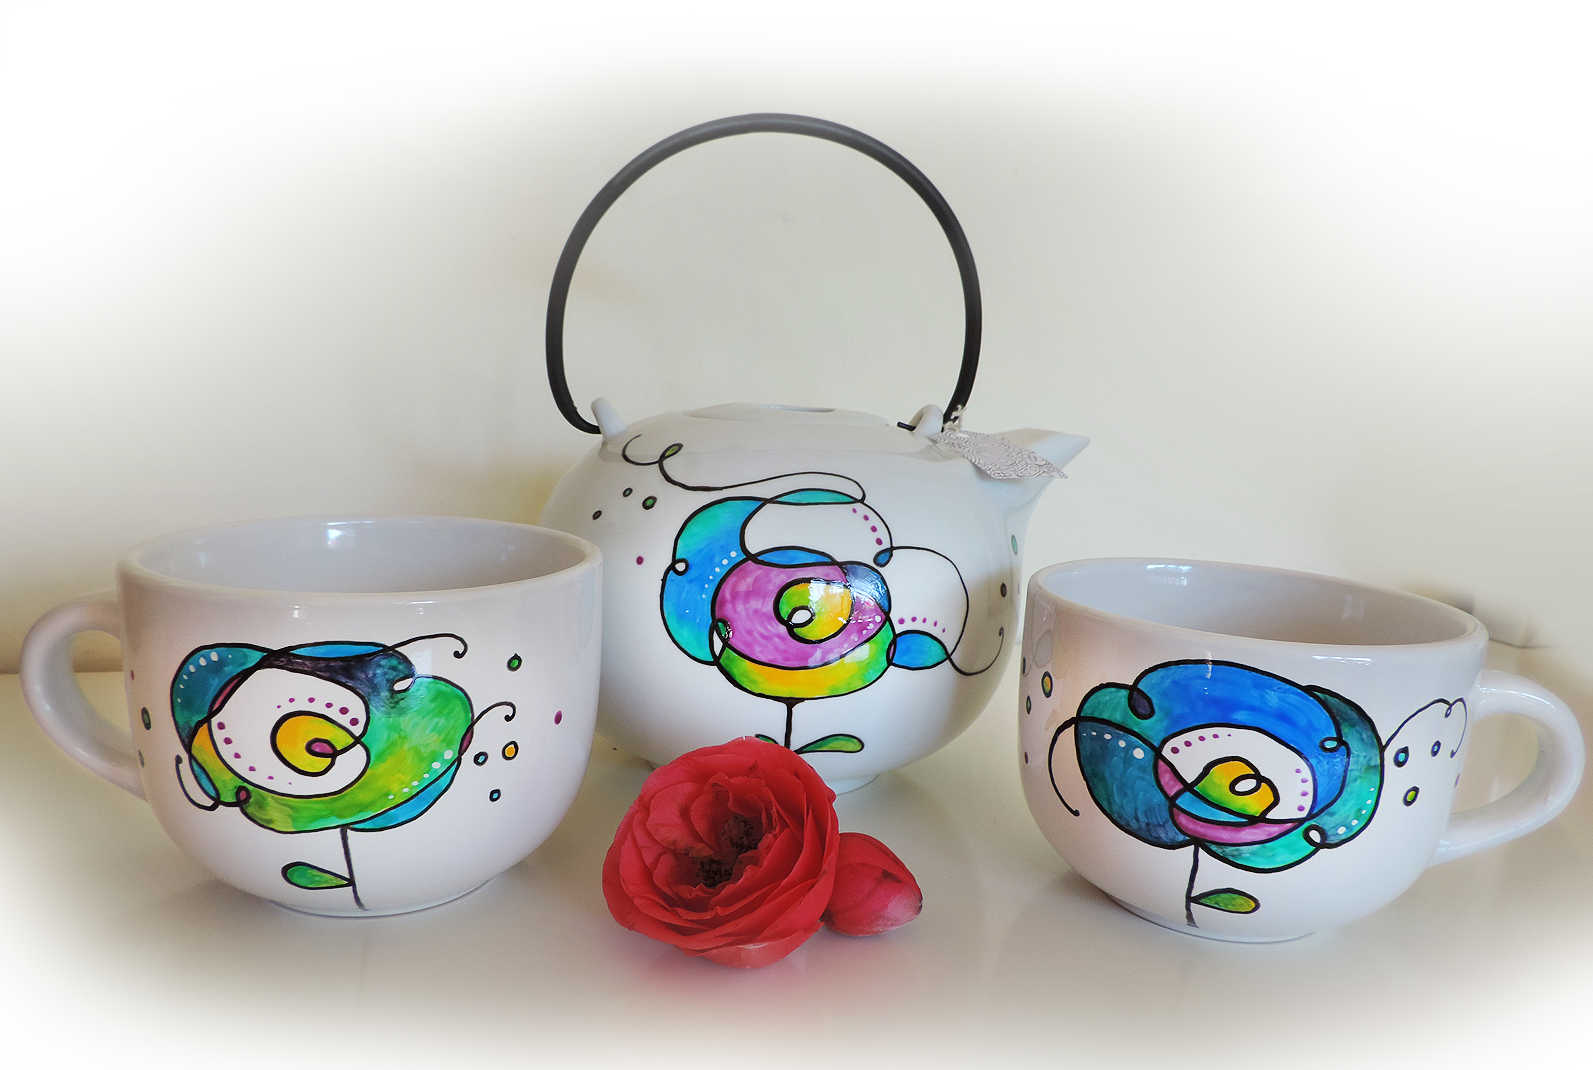 Unique hand-painted ceramic creations by the artist Luciana Torre. Customizable mugs. Perfect gift idea for special occasions such as Valentine's Day, Mother's Day, birthdays and Christmas. Gifts for mom and special mugs for friends and colleagues. Top ten gifts for tea-lovers and coffee-lovers. I use special top quality ceramic paints, dishwasher safe. Requests to hello@lucianatorre.com